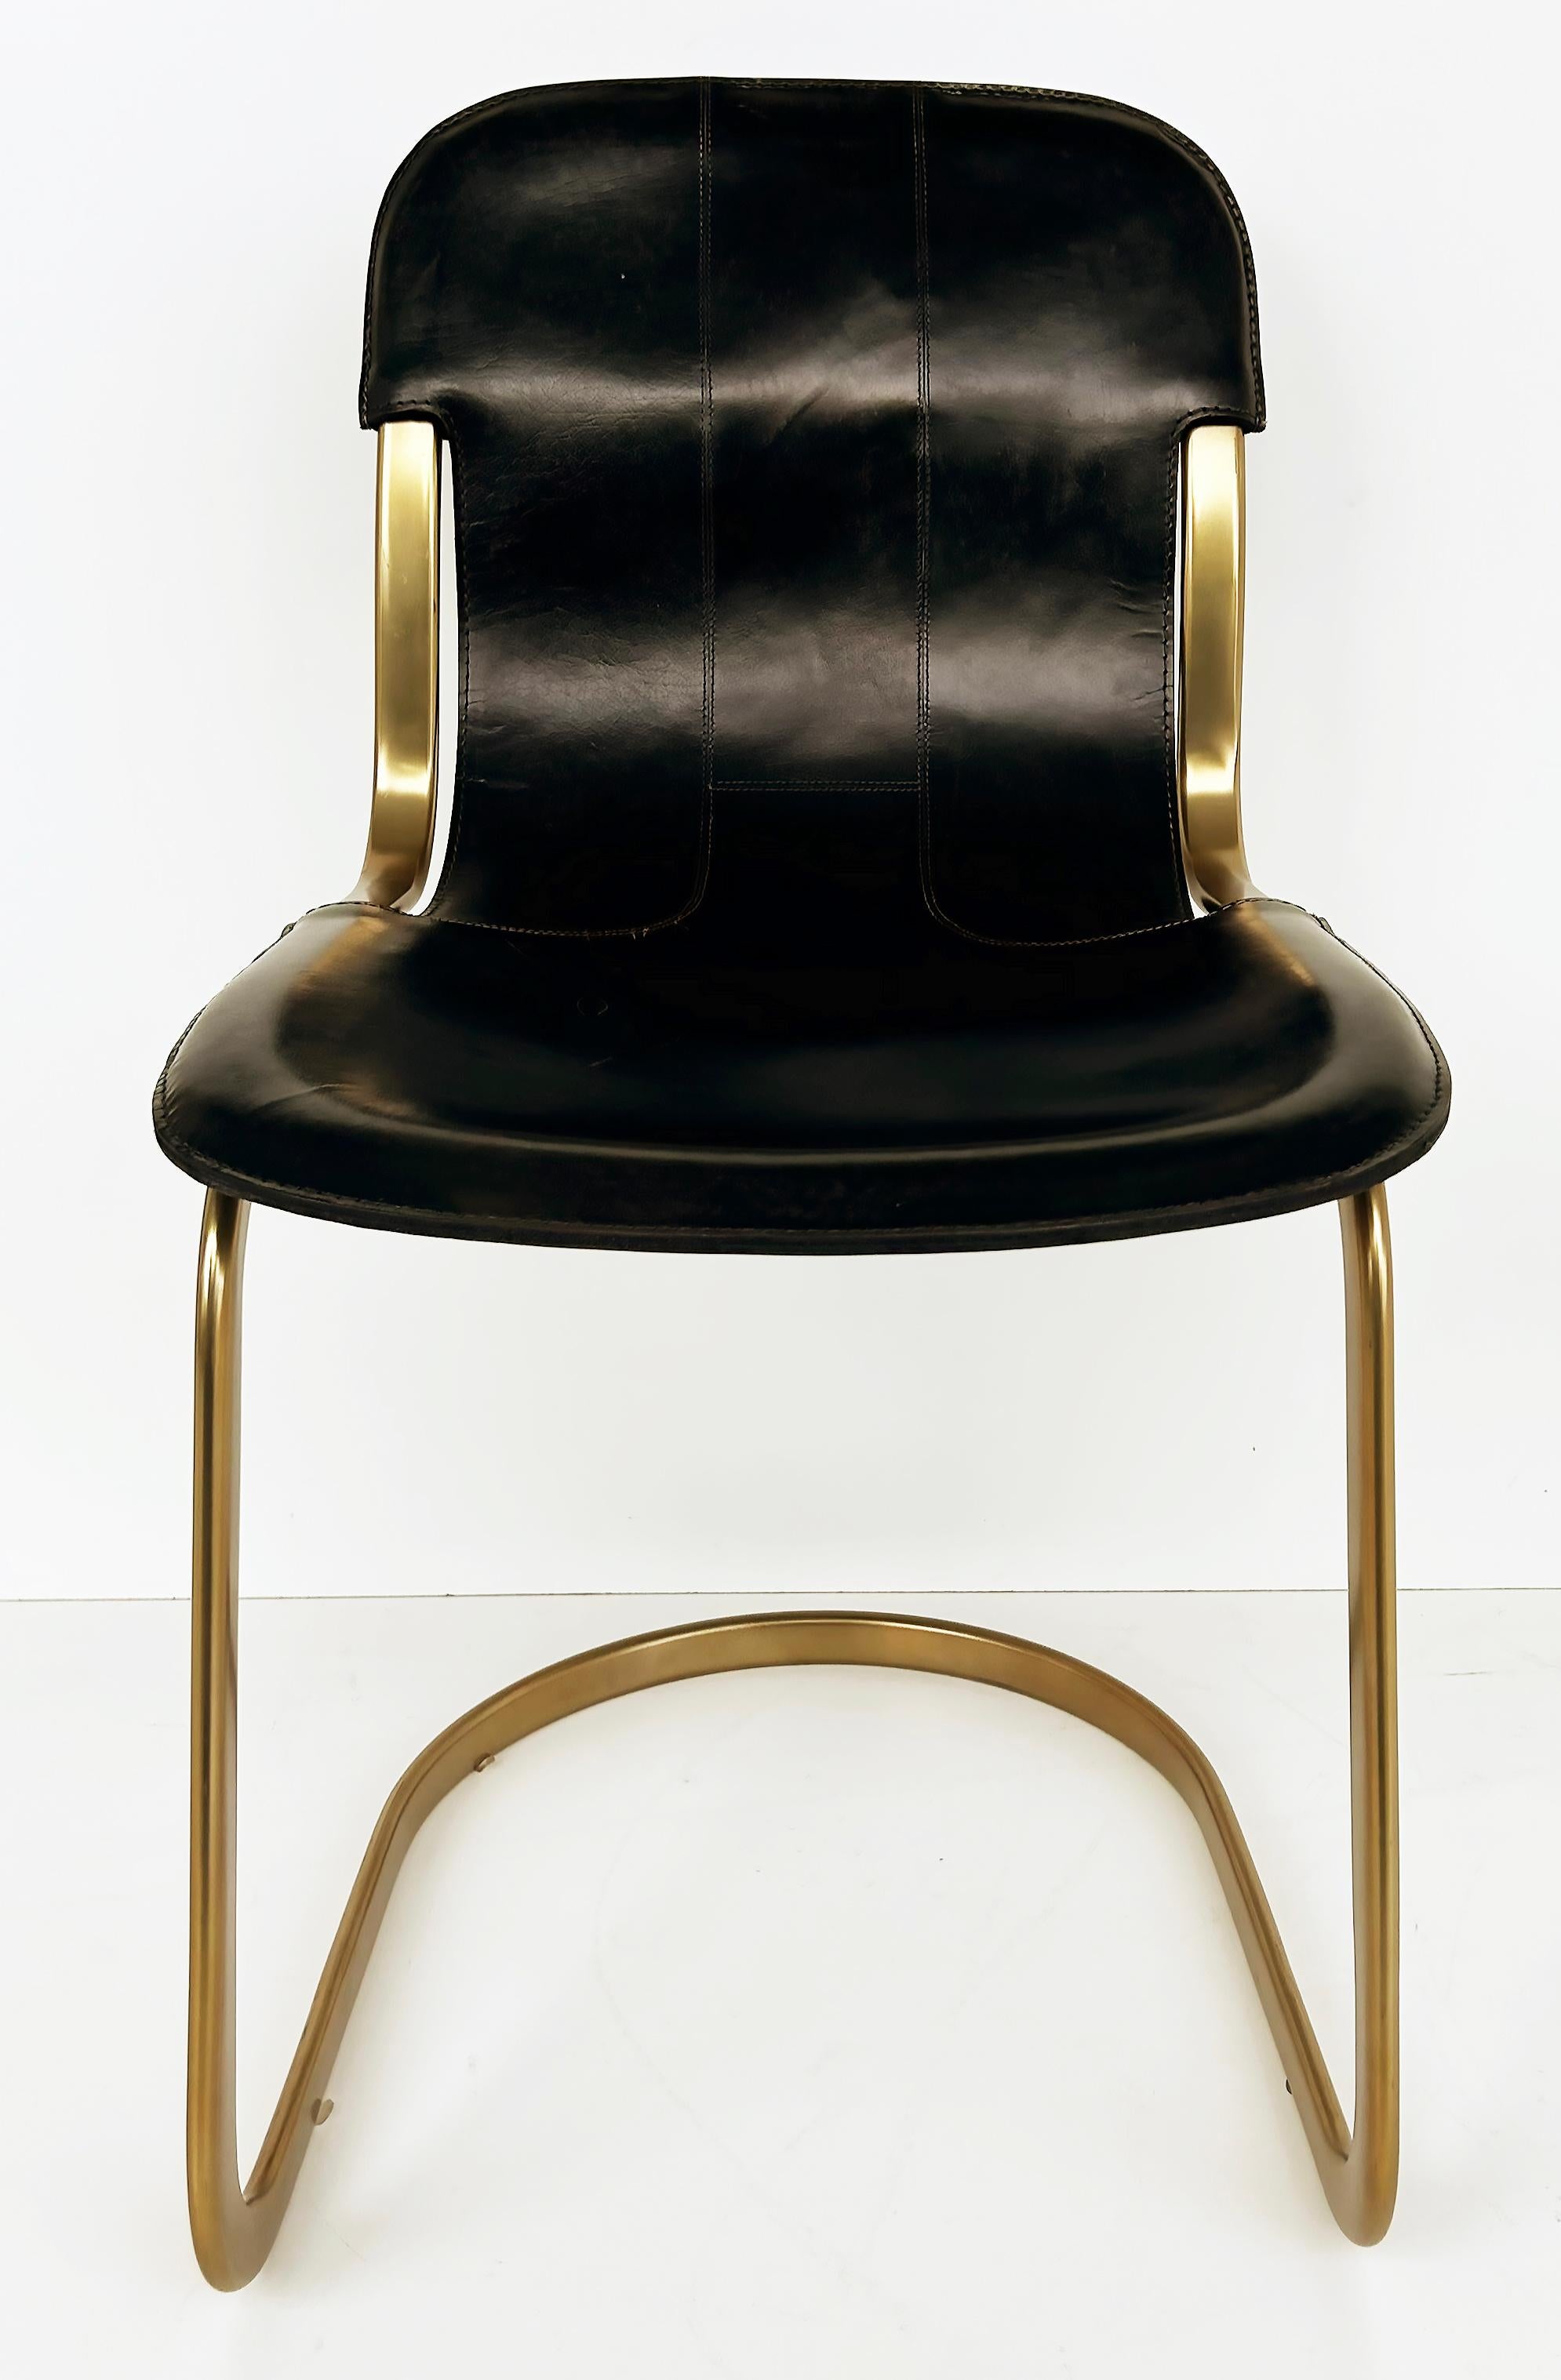 Brass Plated Leather Cantilevered Dining Chairs After Willy Rizzo Desgn

Offered for sale is a set of six brass plated and stitched leather cantilevered dining chairs after a Mid-century Modern design by Willy Rizzo. The chairs have a great look and